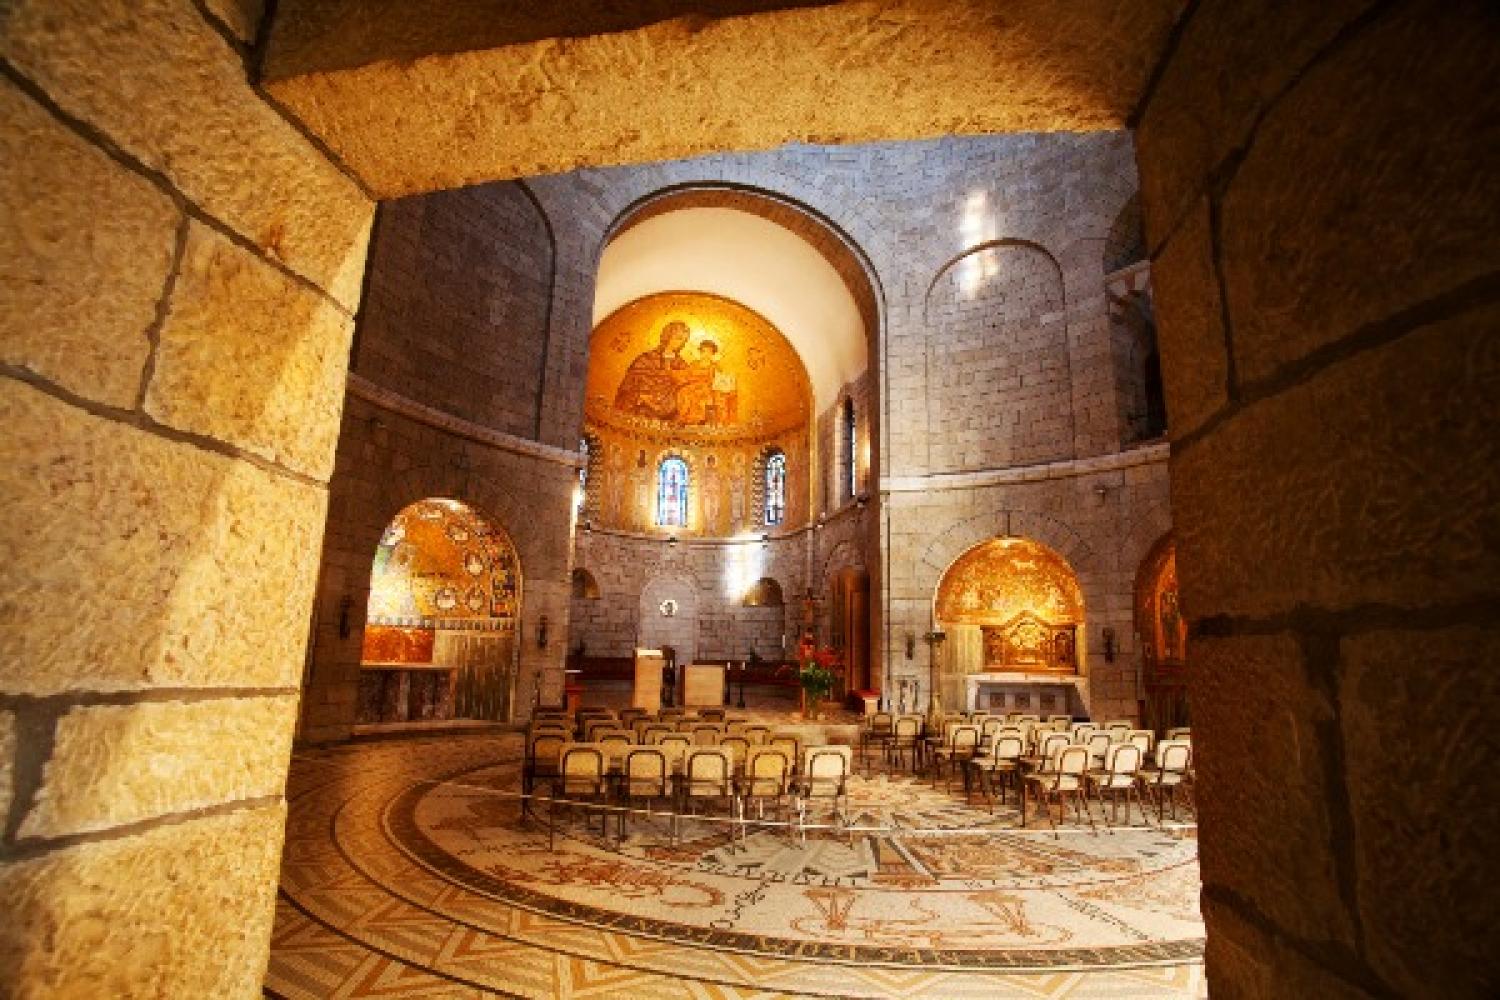 Interior of the Abbey of the Dormition in Jerusalem